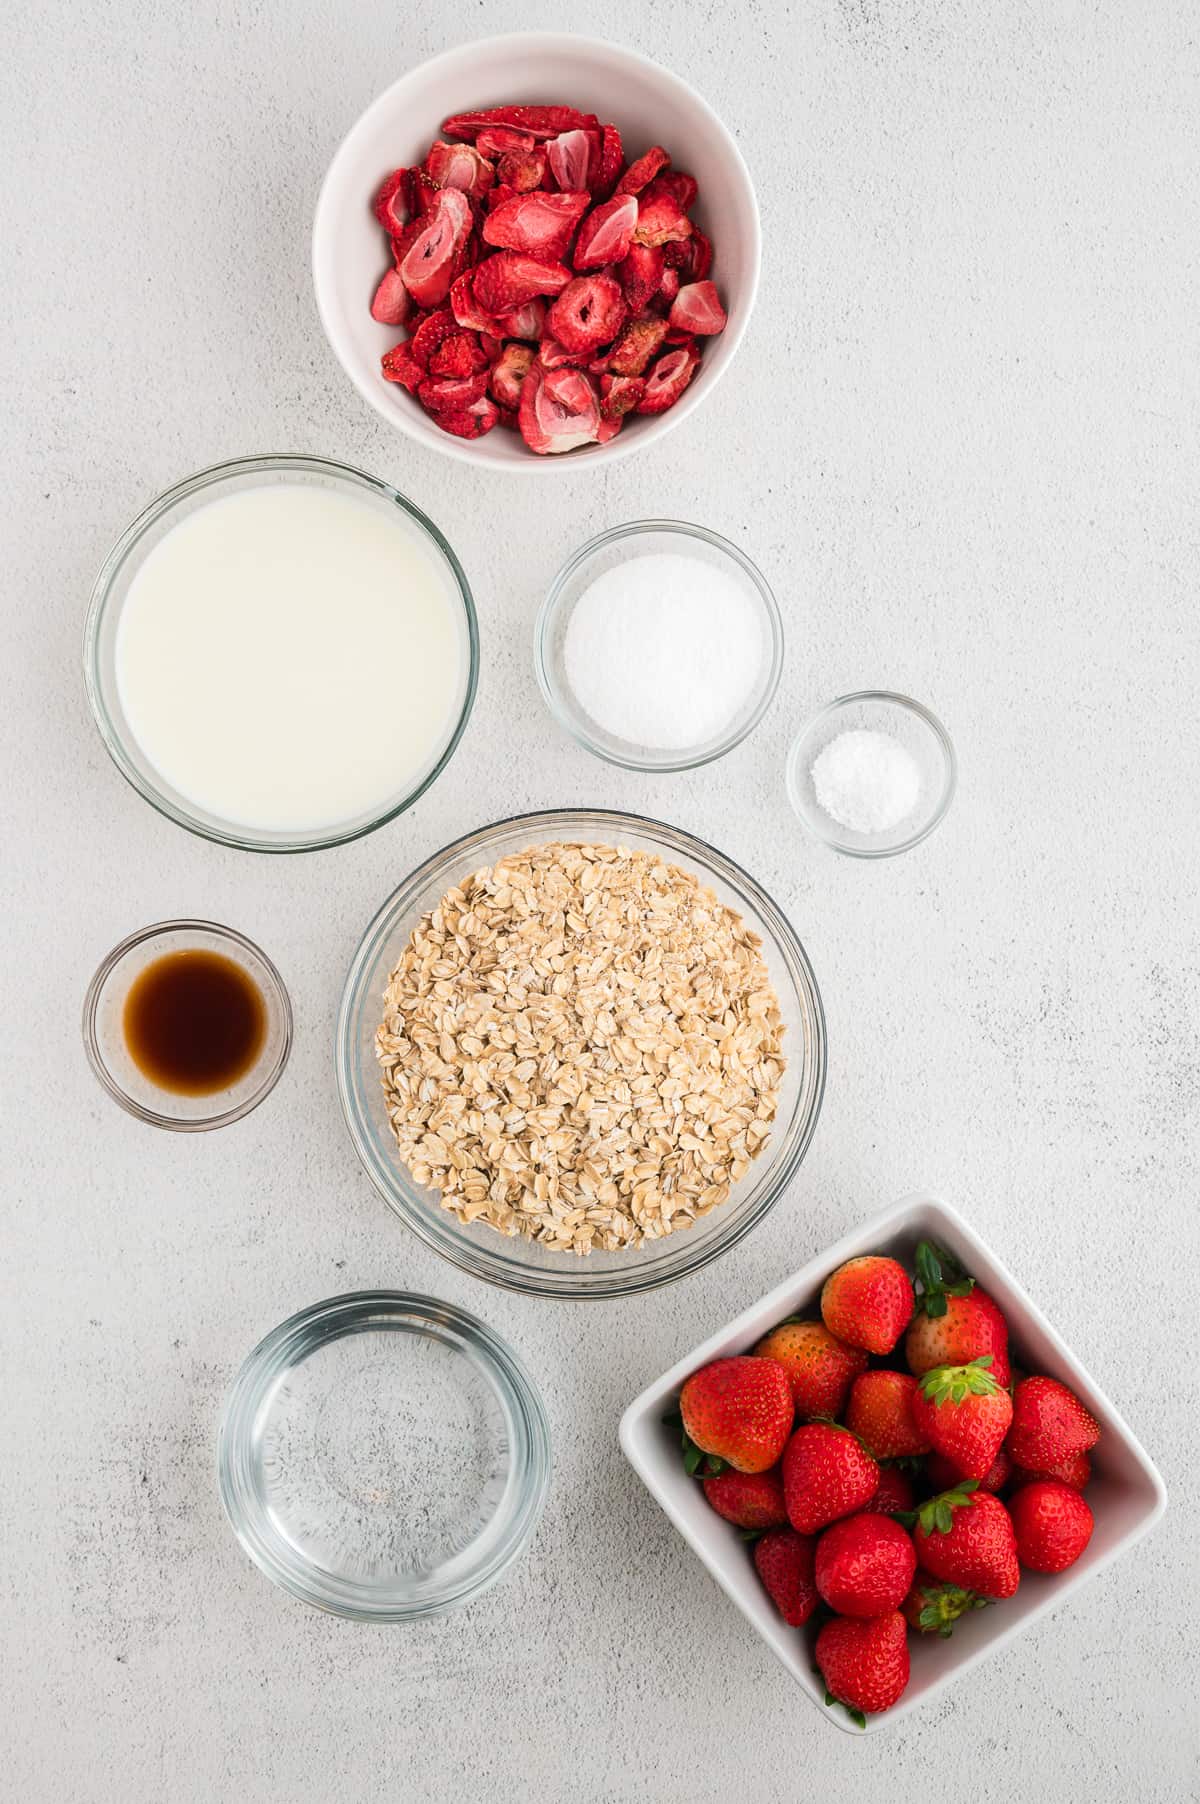 Ingredients need to make Strawberry Oatmeal.